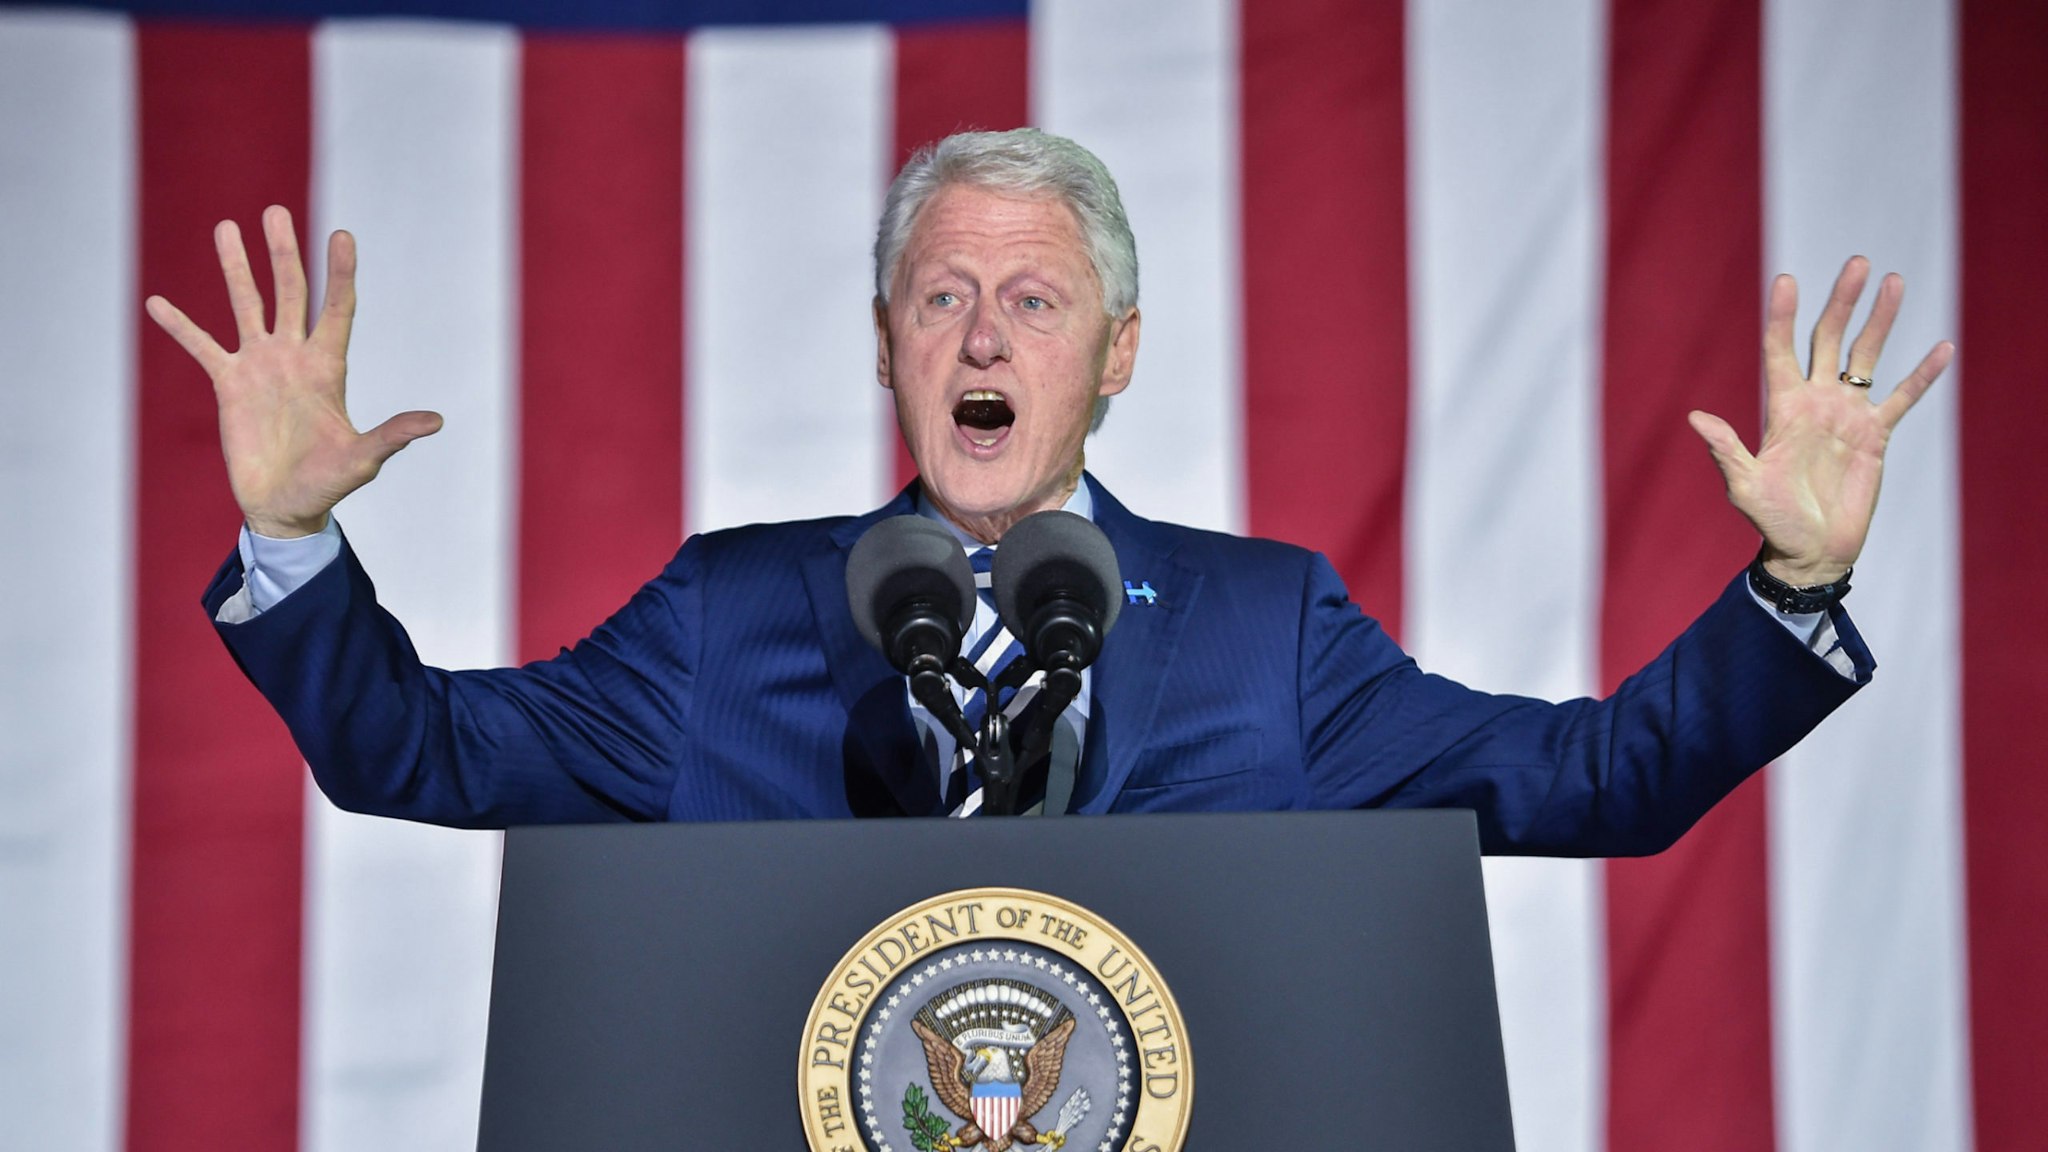 Former US president Bill Clinton addresses a rally for his wife Democratic presidential candidate Hillary Clinton on the final night of the 2016 US presidential campaign at Independence Mall in Philadelphia, Pennsylvania, November 07, 2016.